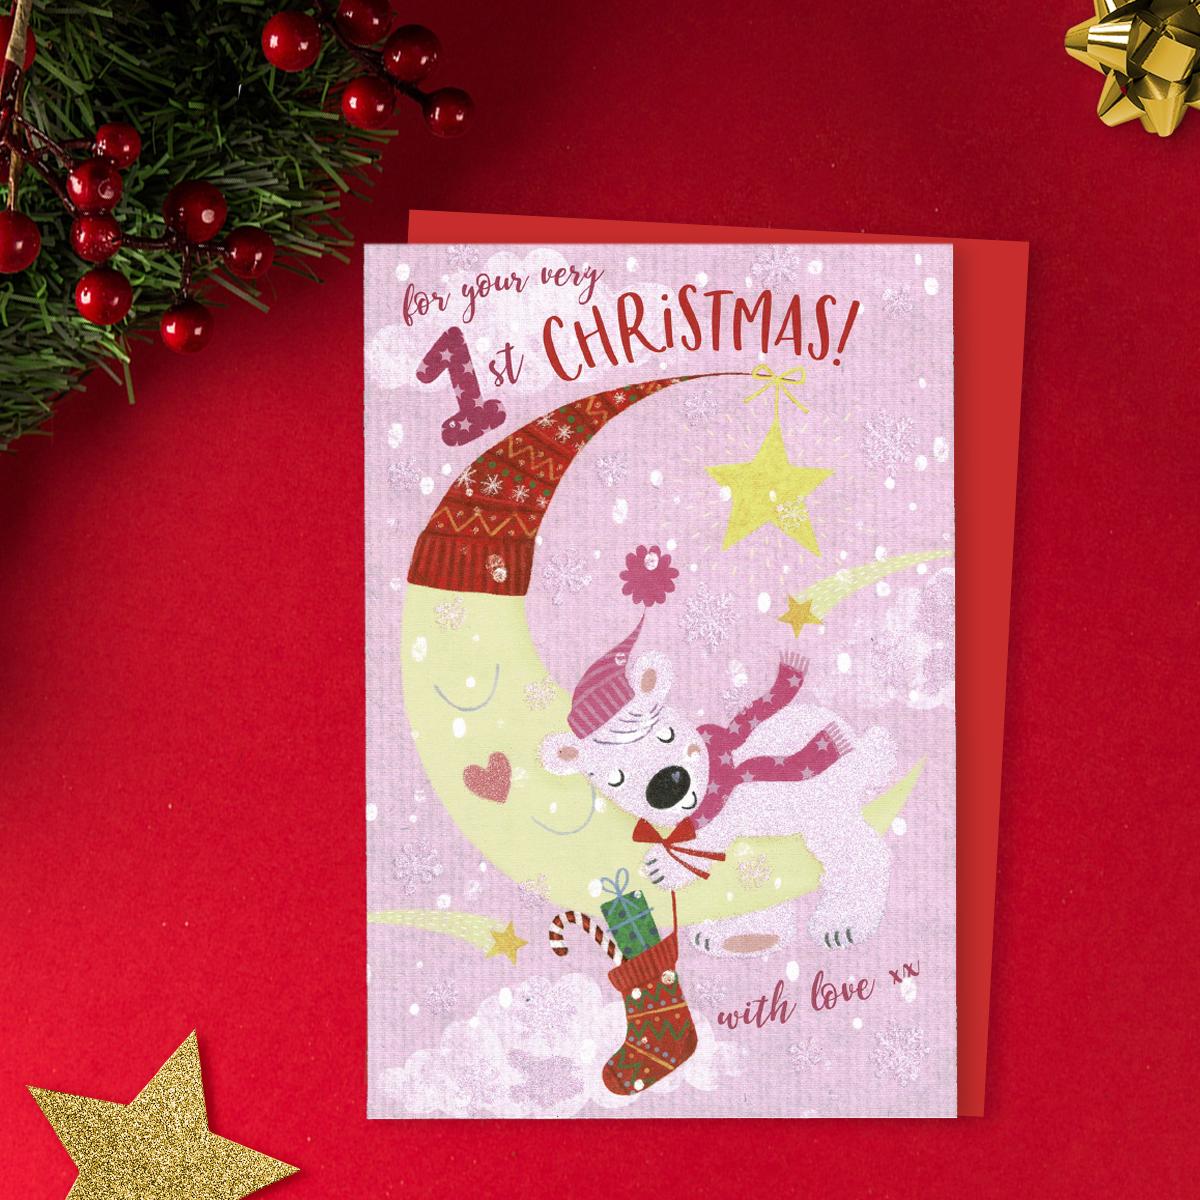 For Your Very 1st Christmas With love Featuring A Bear Asleep On The Moon With Christmas Stocking! Finished With Sparkle And Printed Insert. Complete With a Red Envelope